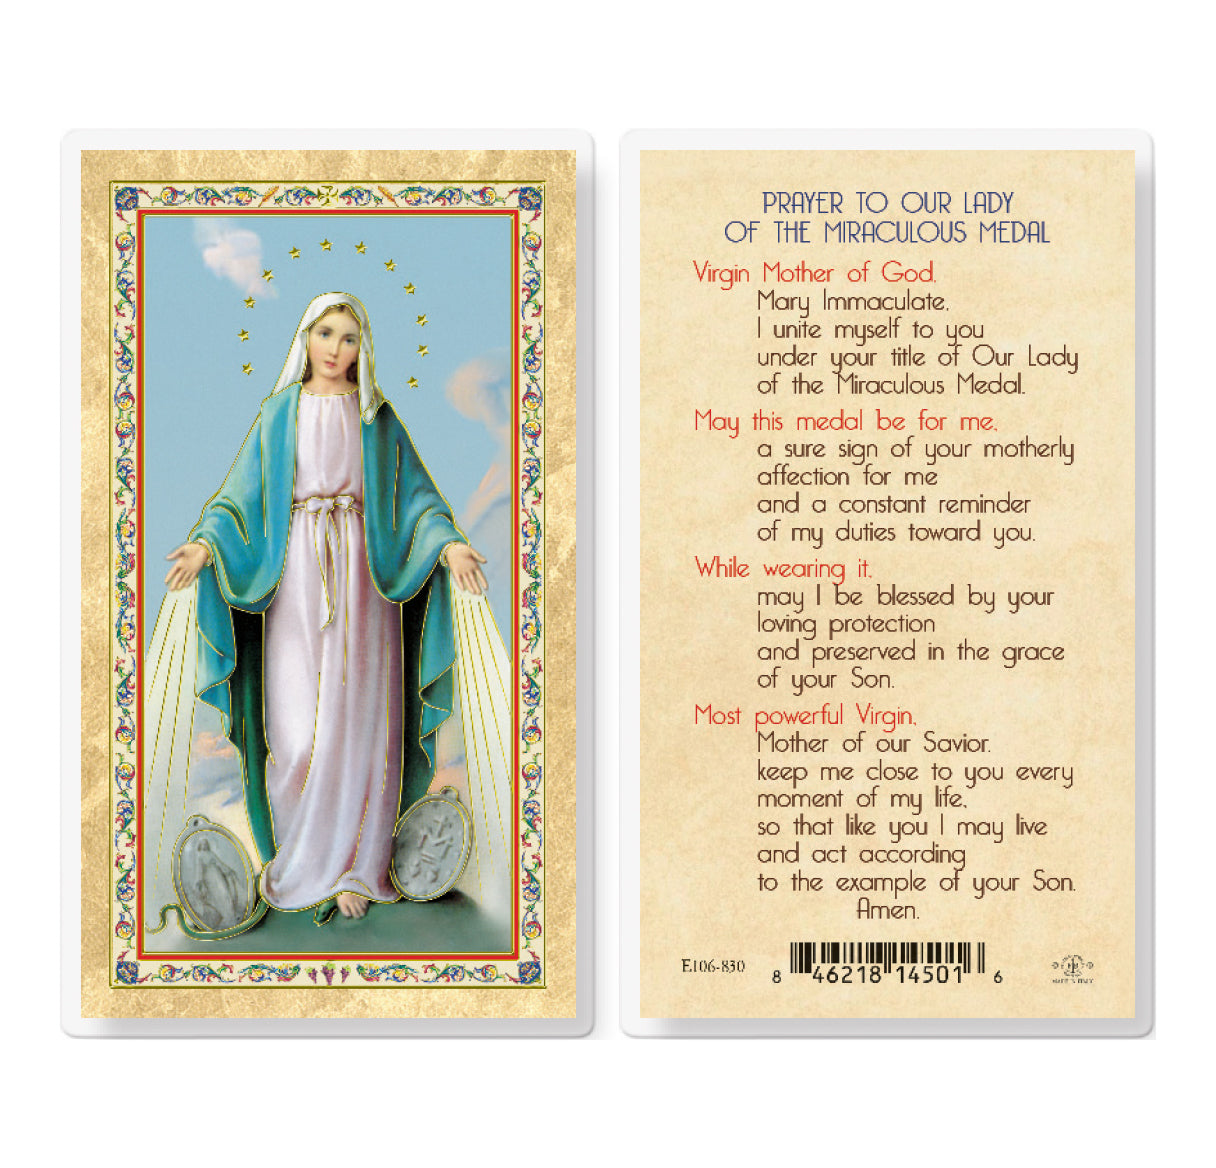 Our Lady of the Miraculous Medal Gold-Stamped Laminated Catholic Prayer Holy Card with Prayer on Back, Pack of 25